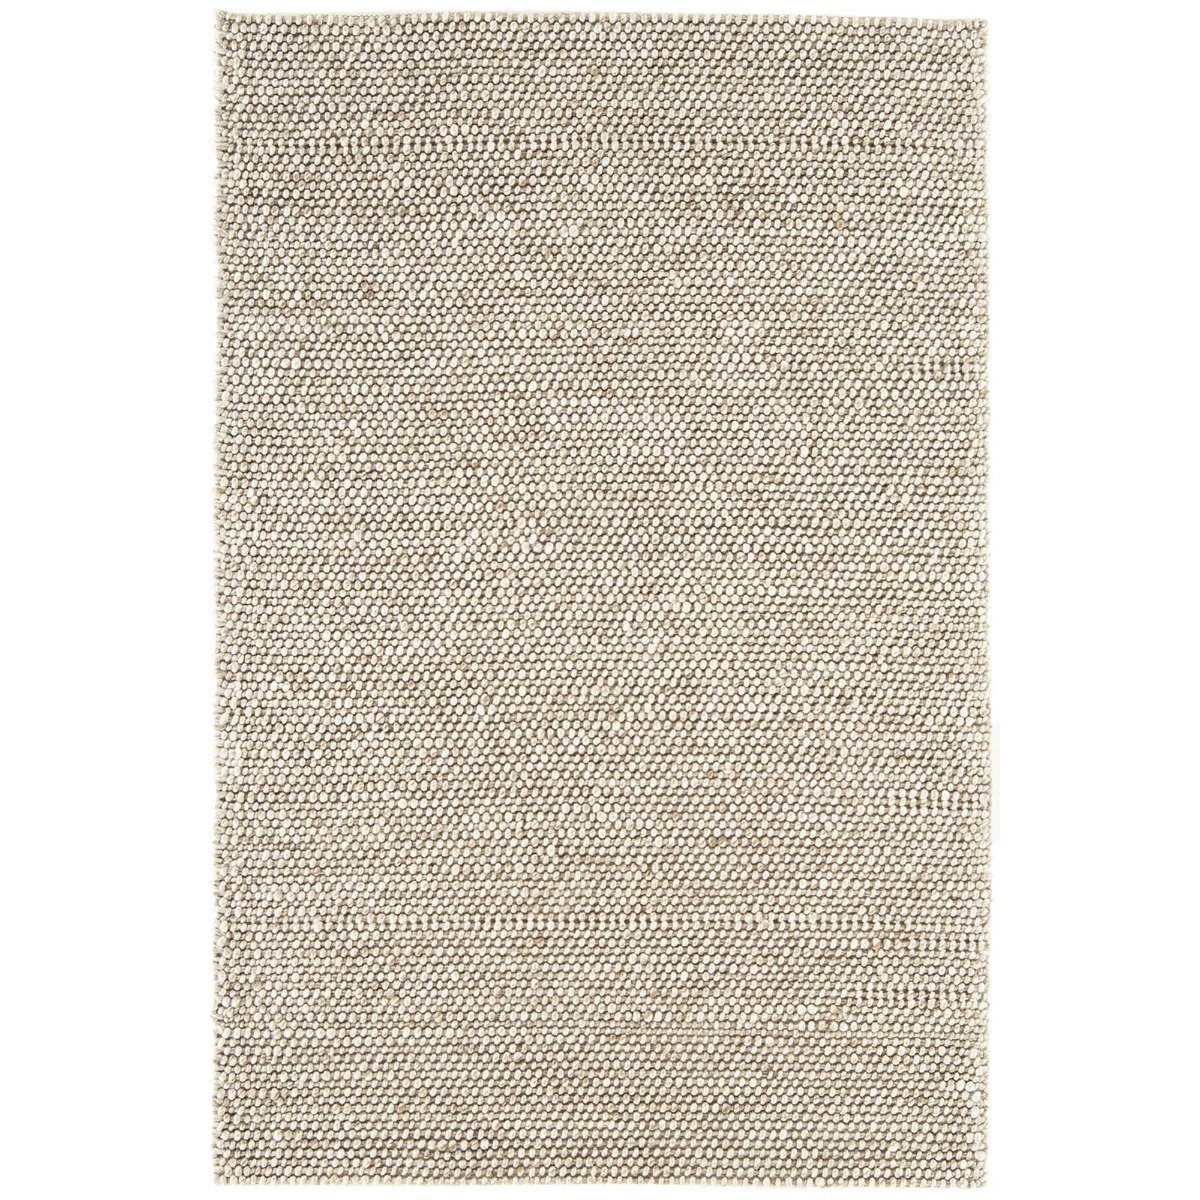 Flori Woven Oyster 160x230cm Rug, Square | W160cm | Barker & Stonehouse